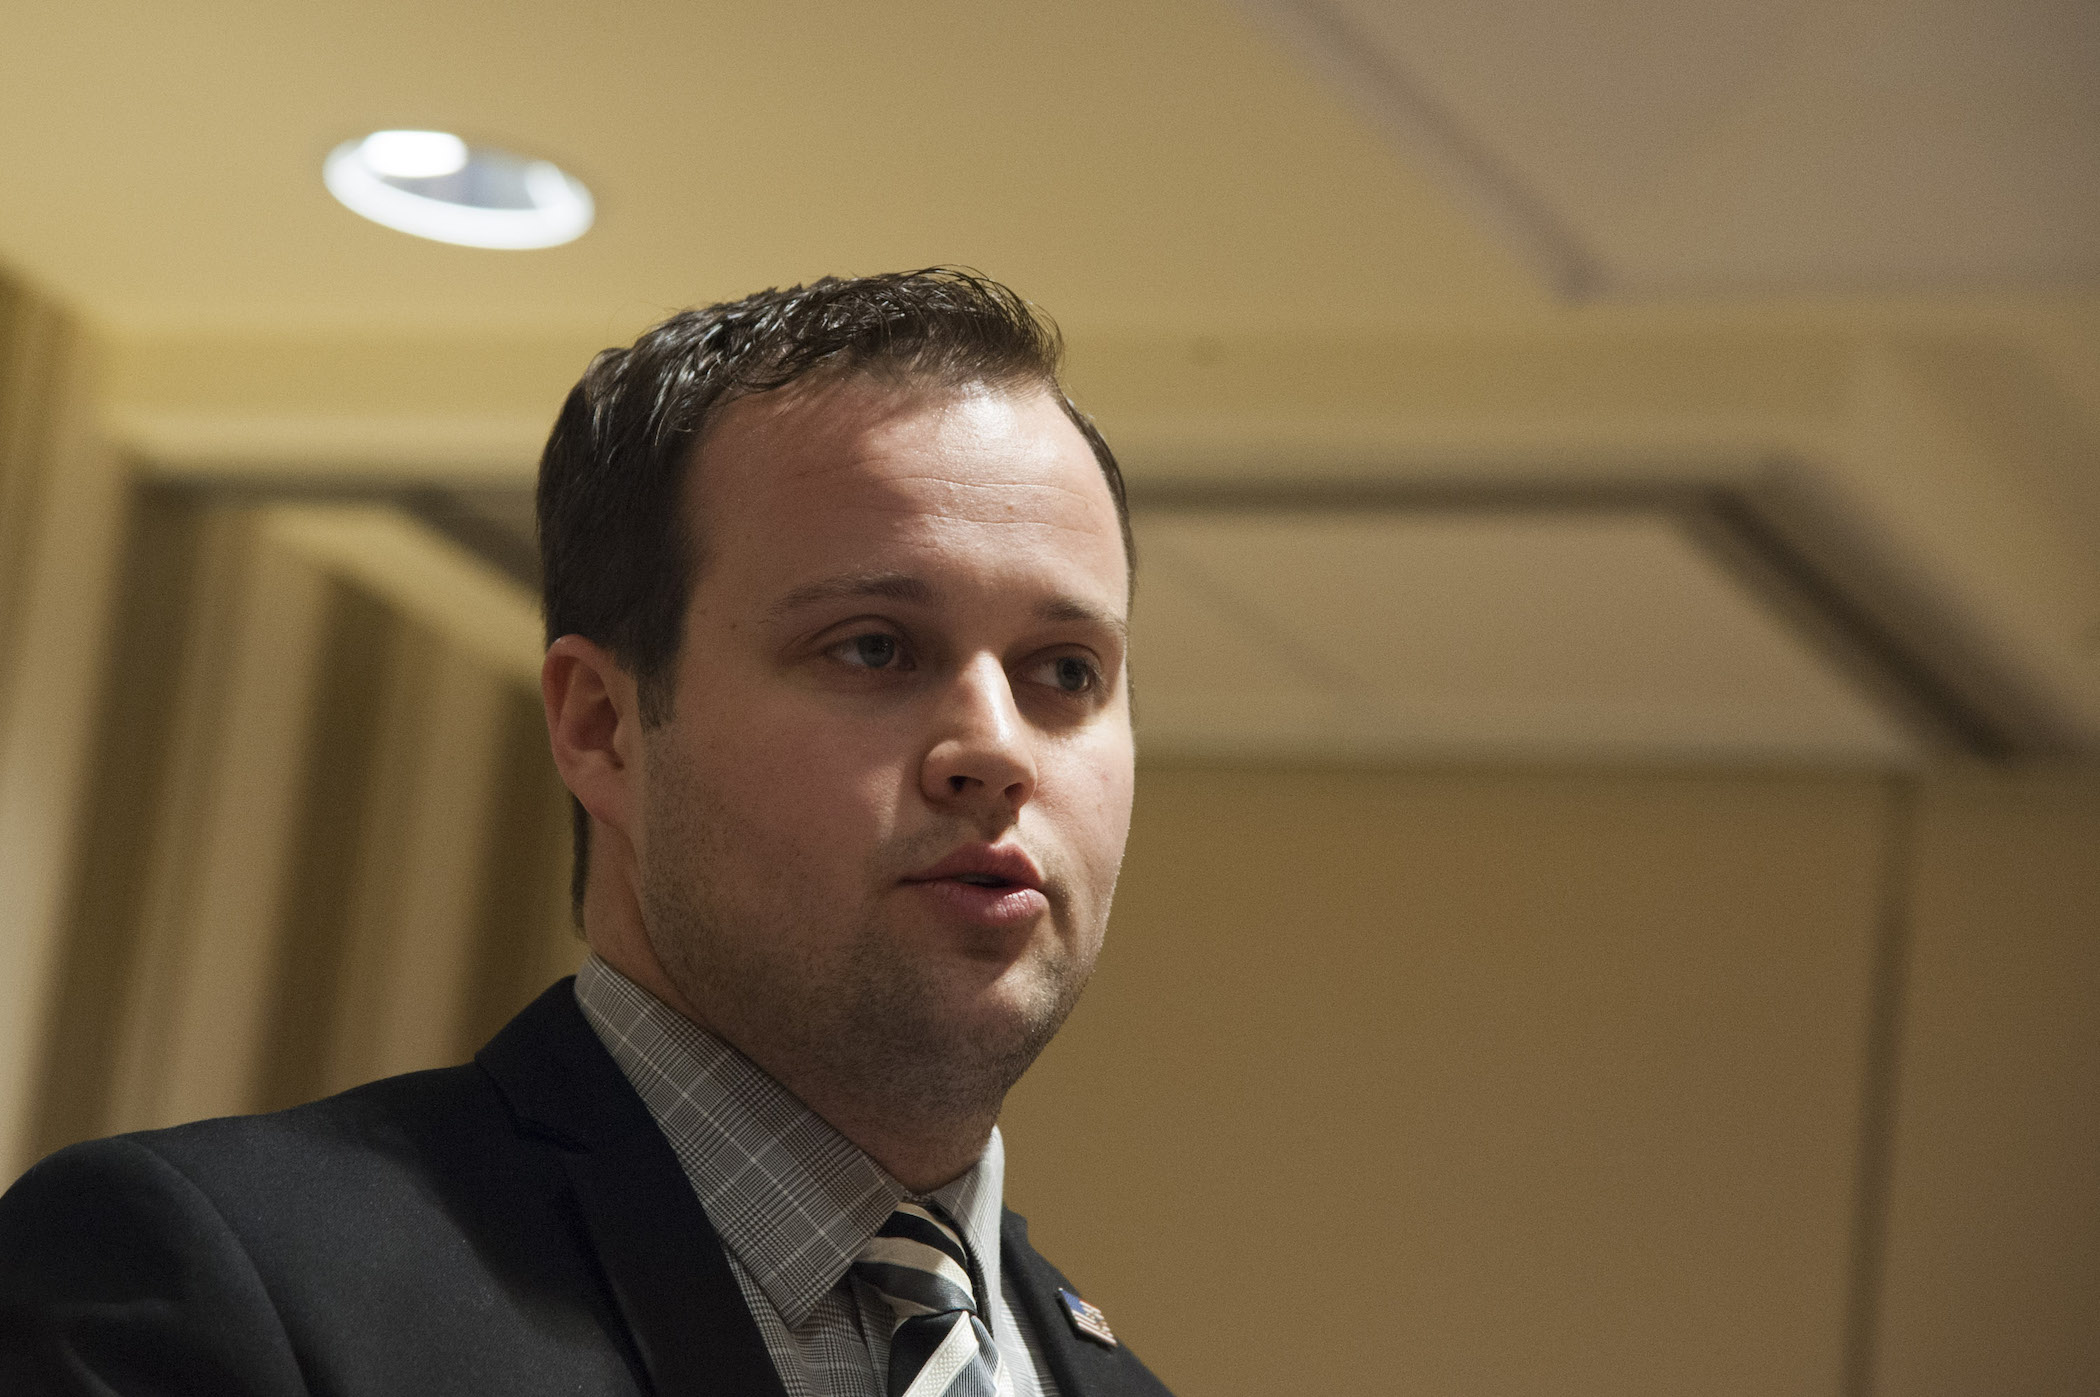 Josh Duggar of the Duggar family half in the shadows at a conference